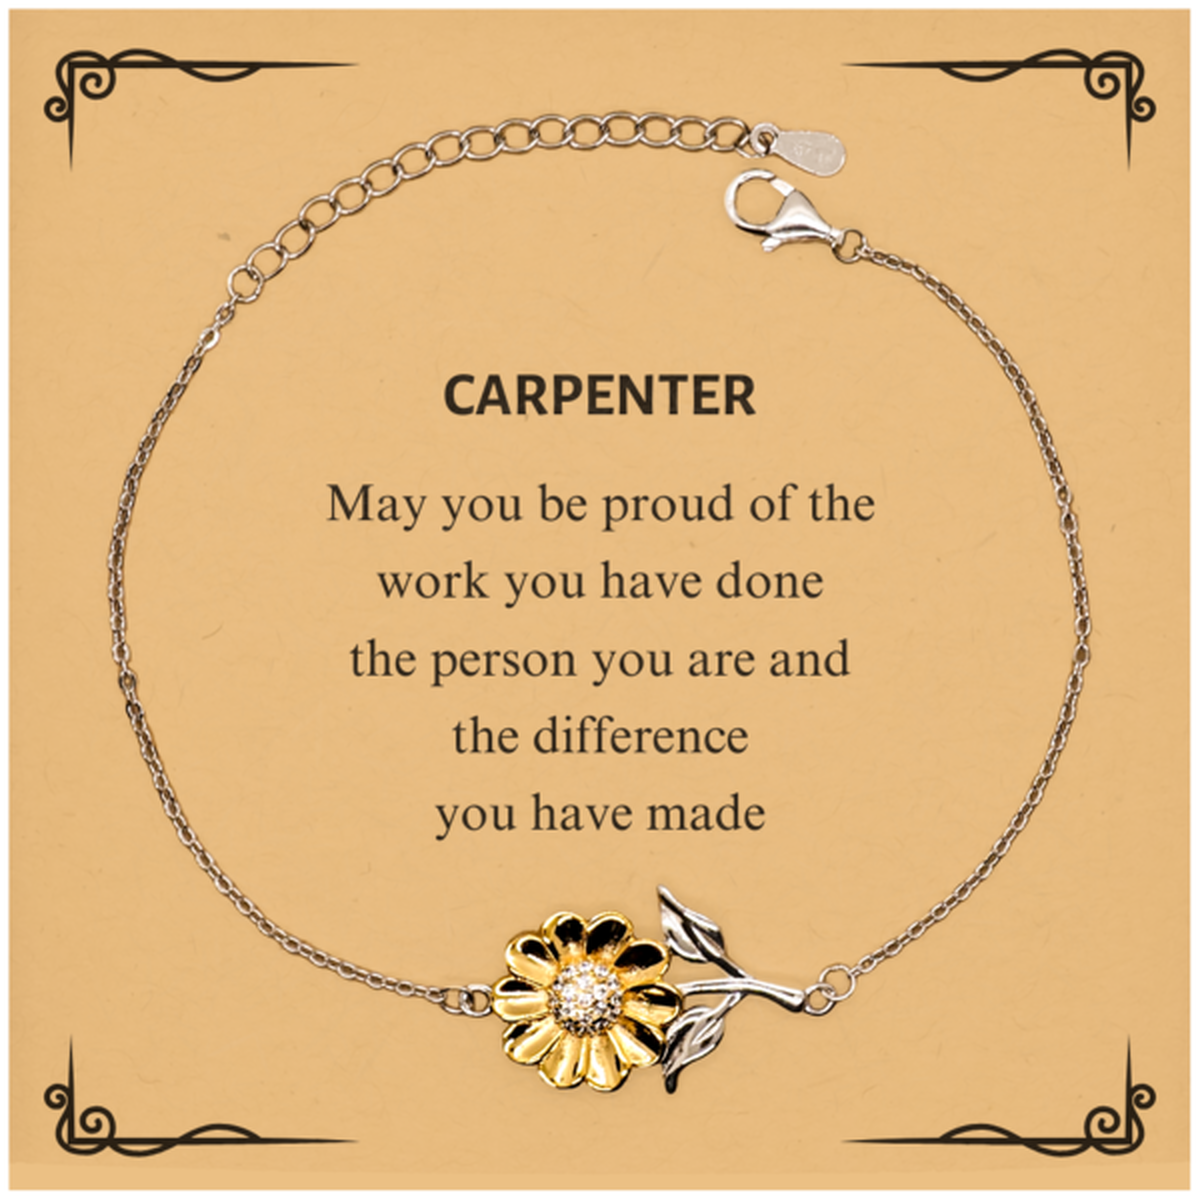 Carpenter May you be proud of the work you have done, Retirement Carpenter Sunflower Bracelet for Colleague Appreciation Gifts Amazing for Carpenter